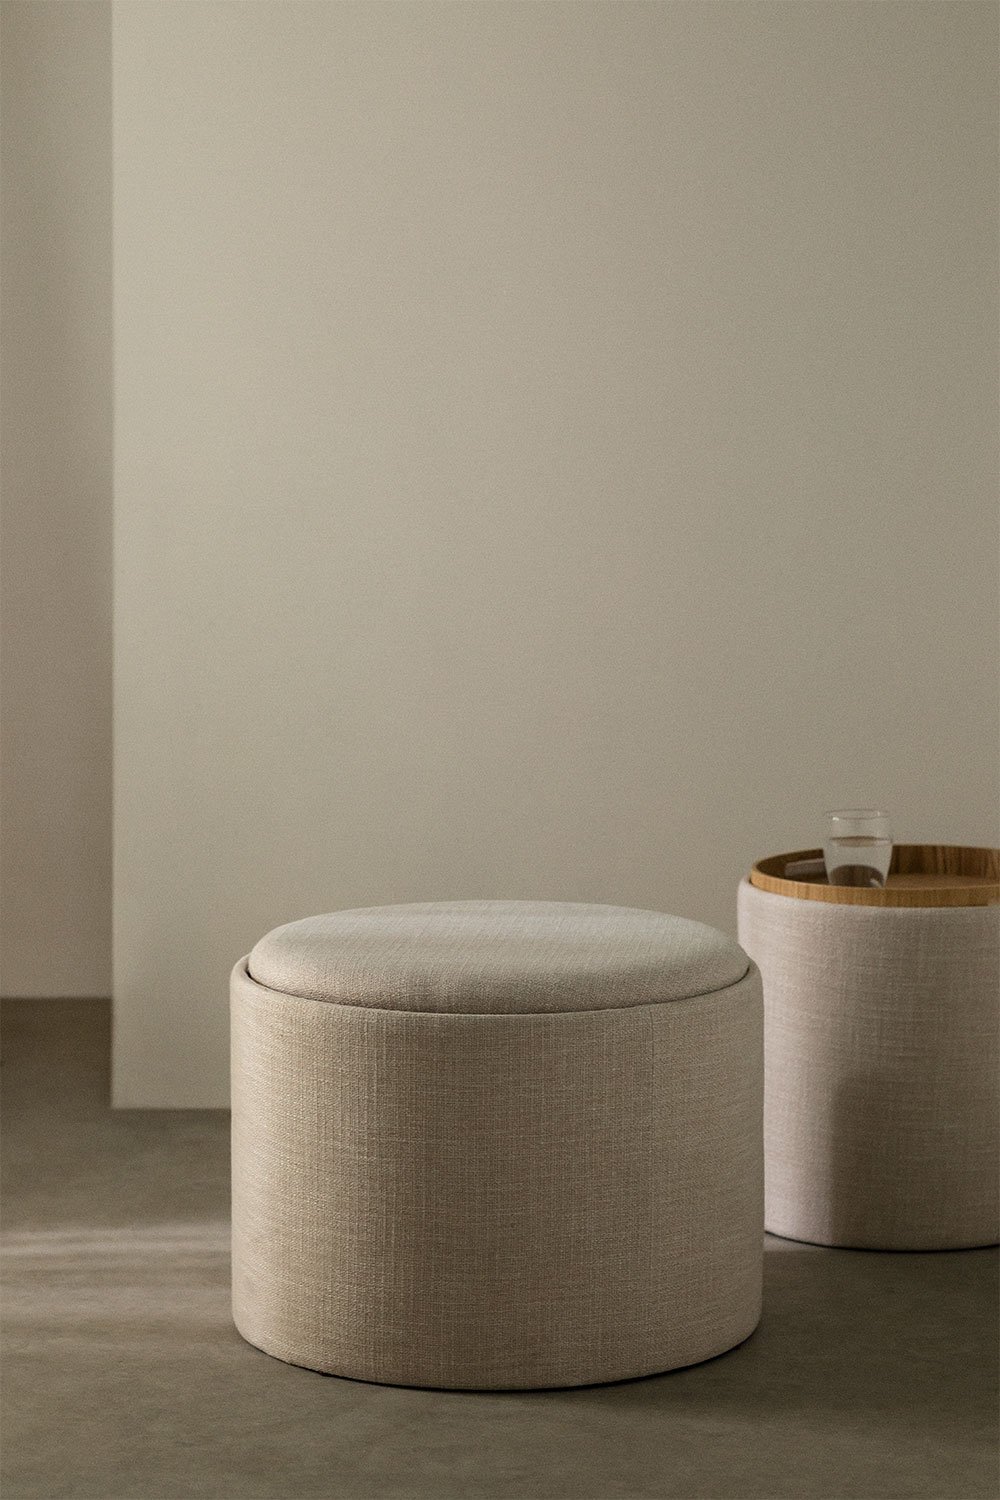 Round Puff with Tray and Storage in Linen Berkeleni, gallery image 1